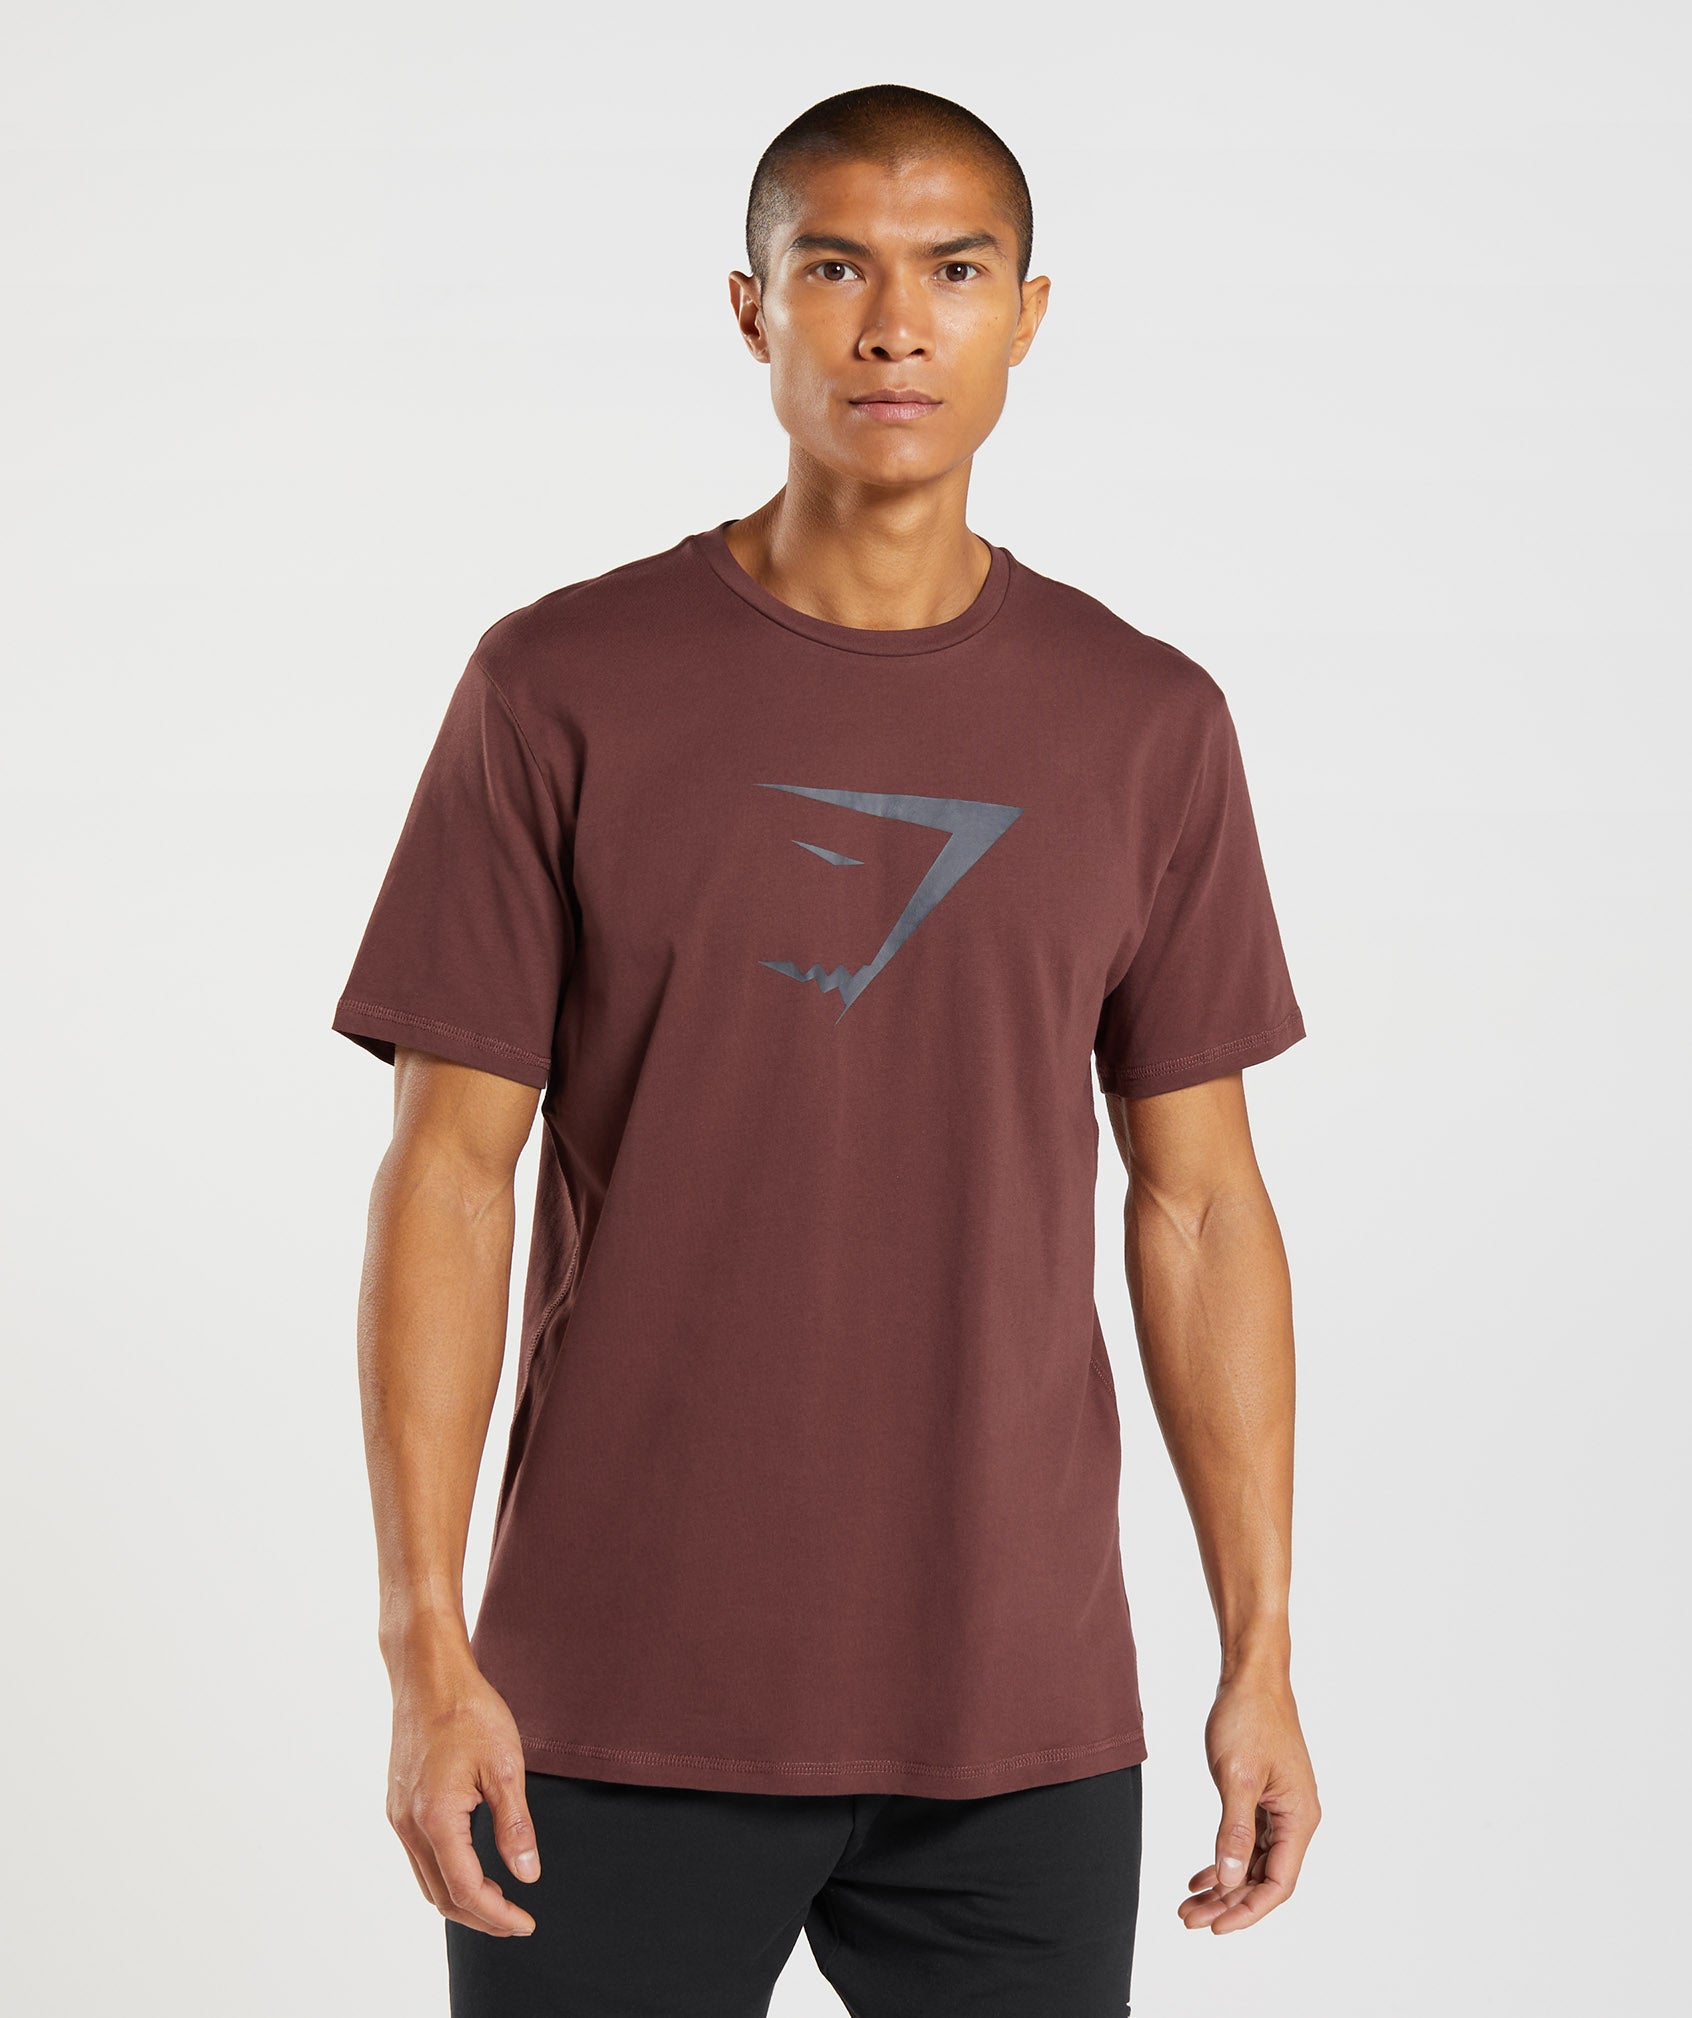 Sharkhead Infill T-Shirt in {{variantColor} is out of stock